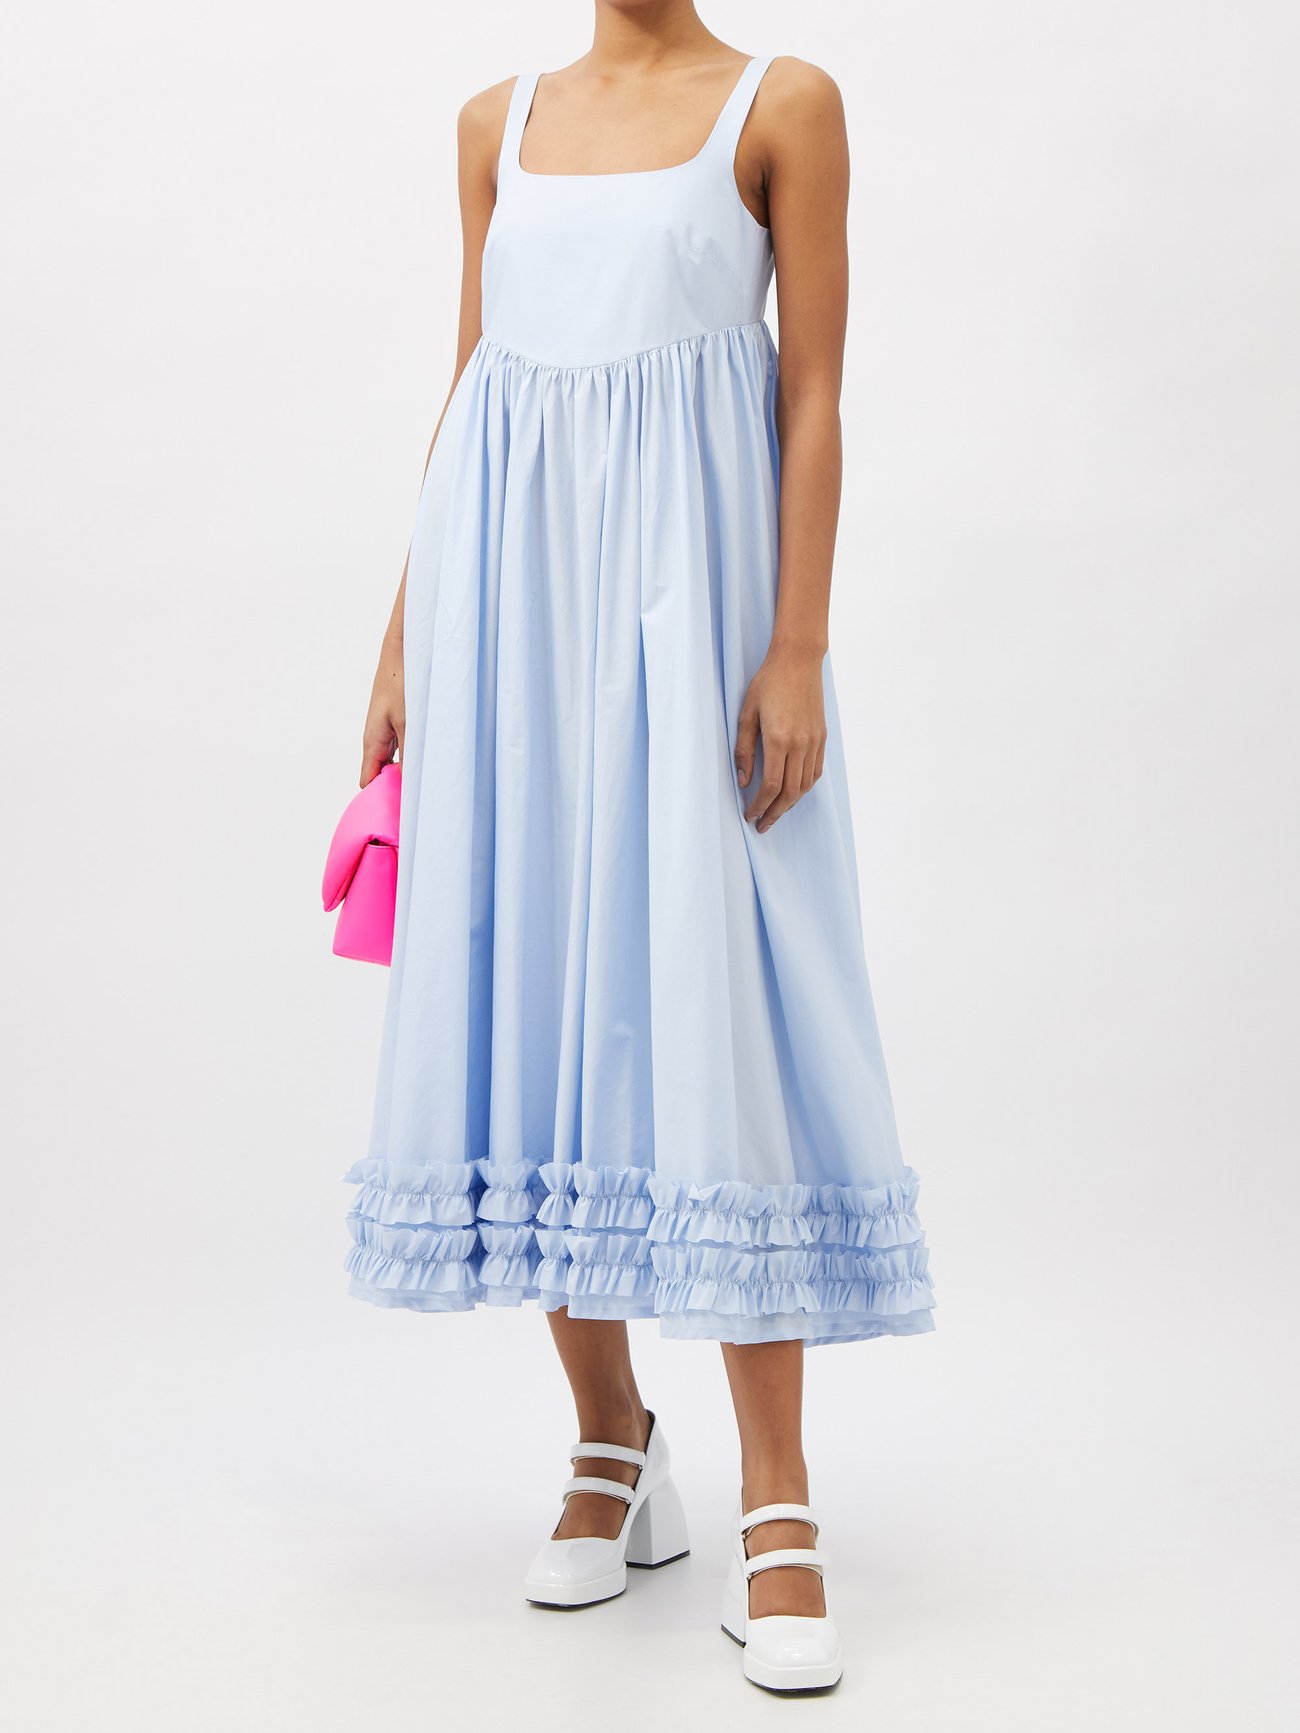 Made in England from lightweight cotton poplin, this light blue midi dress evokes a retro mood with the gently ruffled hem and scooped back cut. Fitted lightly under the bust with a roomy skirt and mid thickness straps. 